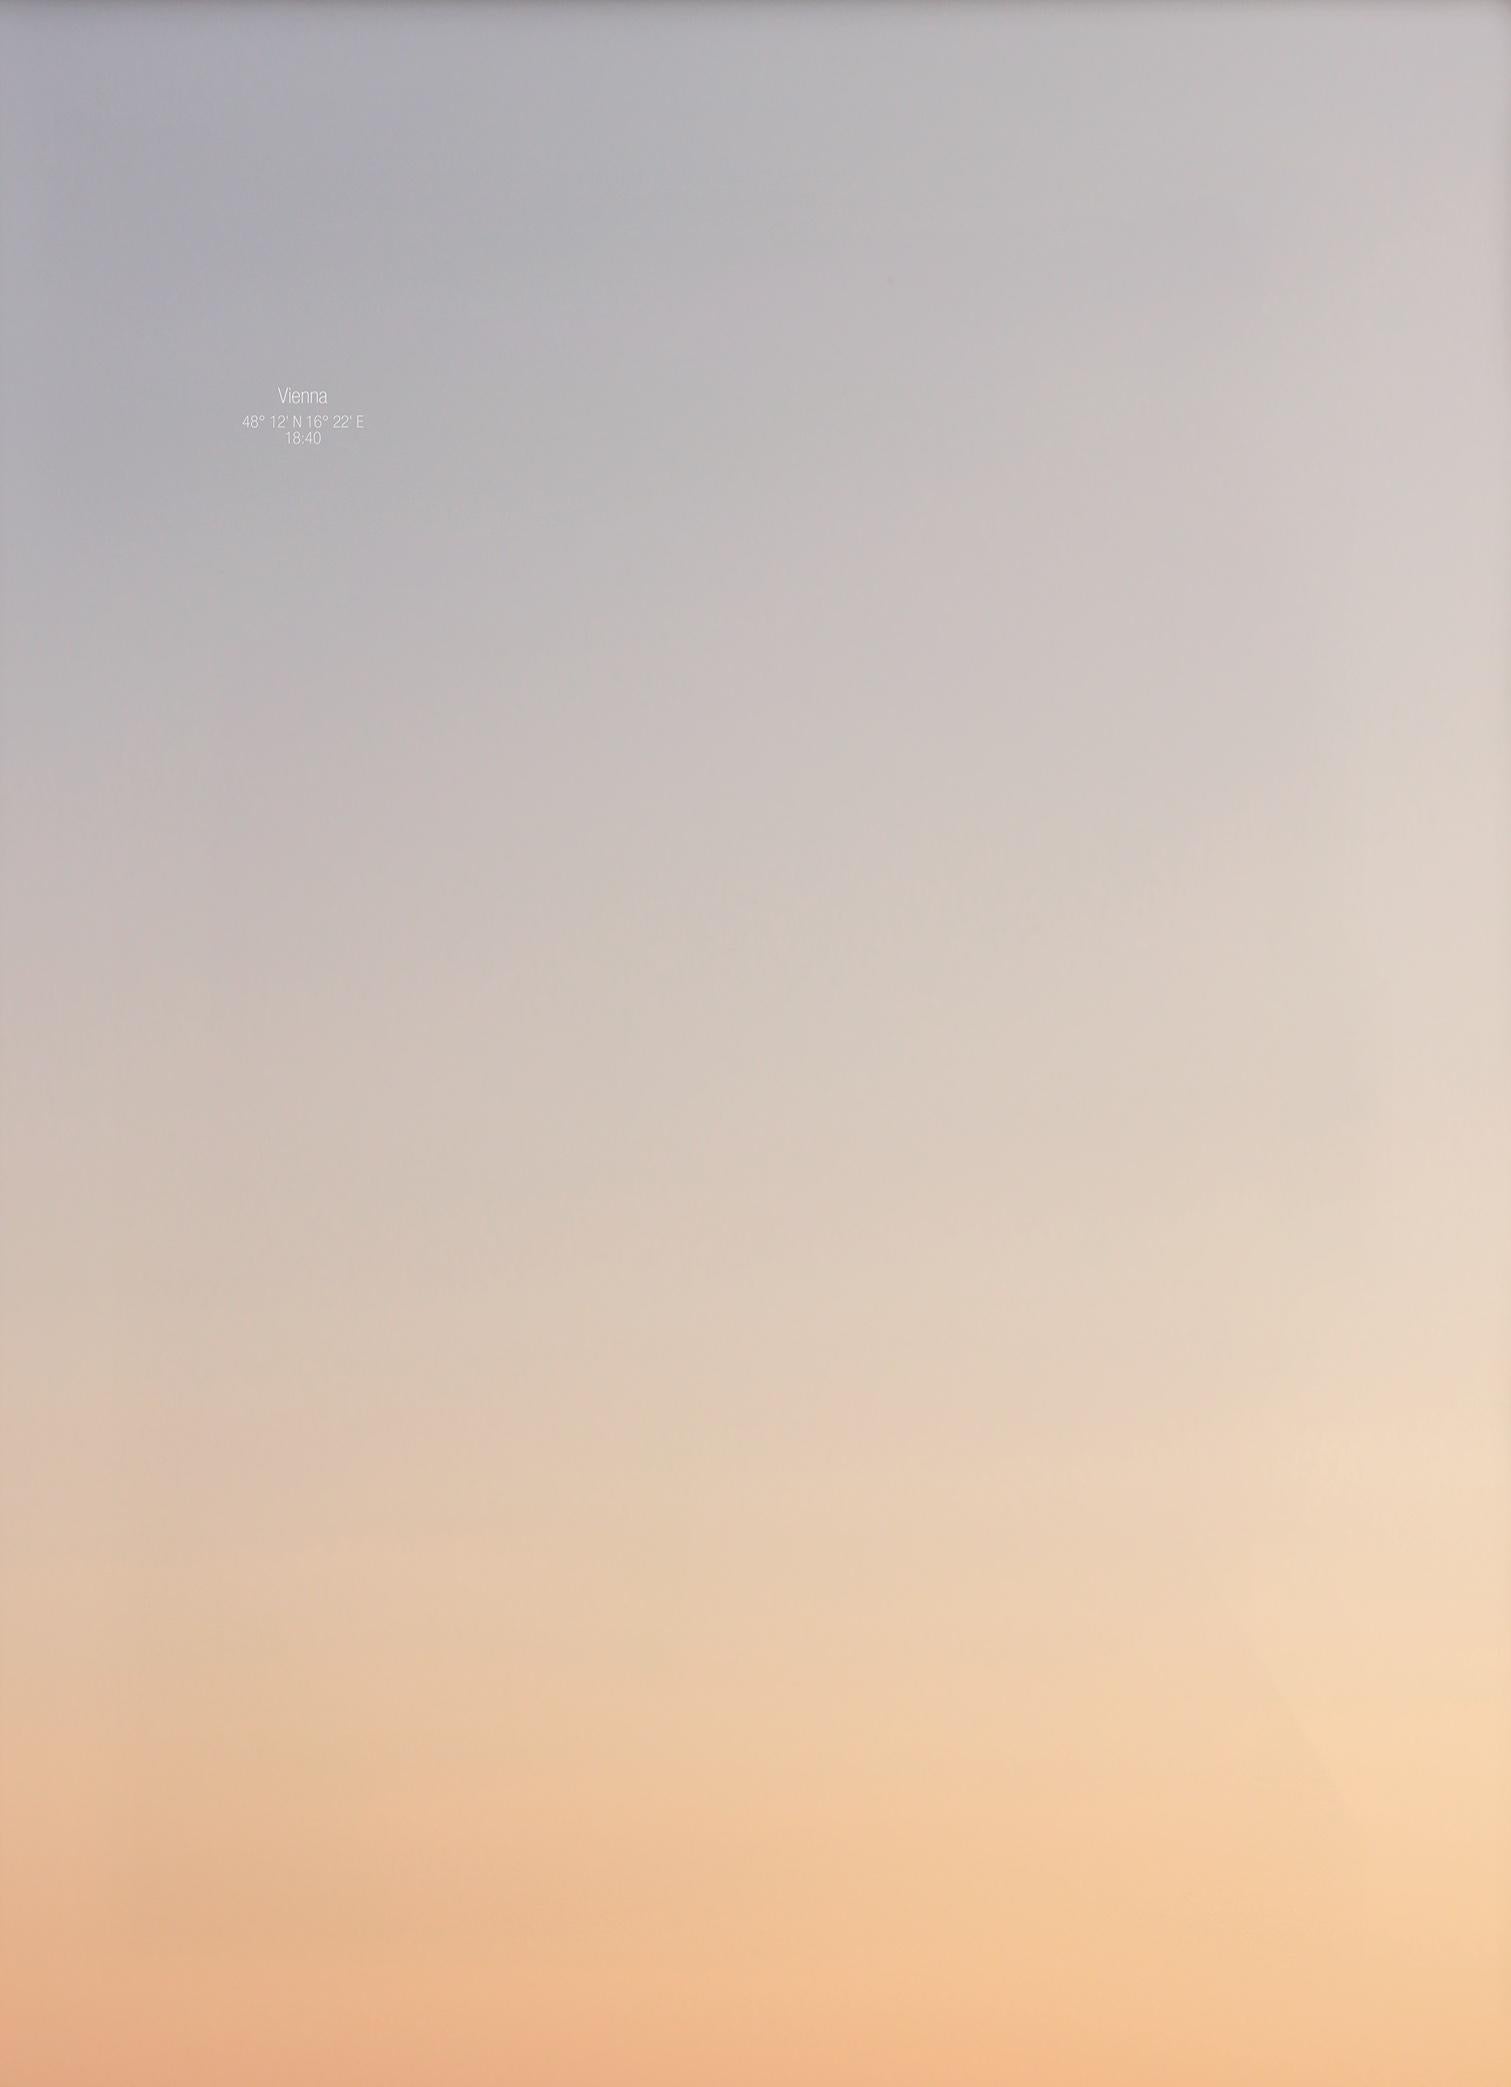 On the other Side of the Sky - 21st Century Abstract Color Photography Sunset
Trieste / Vienna, 18:40
Diptych, 2 pieces, 70 x 50 cm each
Edition 2/5+2 AP
Prints are unframed and come with labels signed by the artist.

When we look at the sky, we see